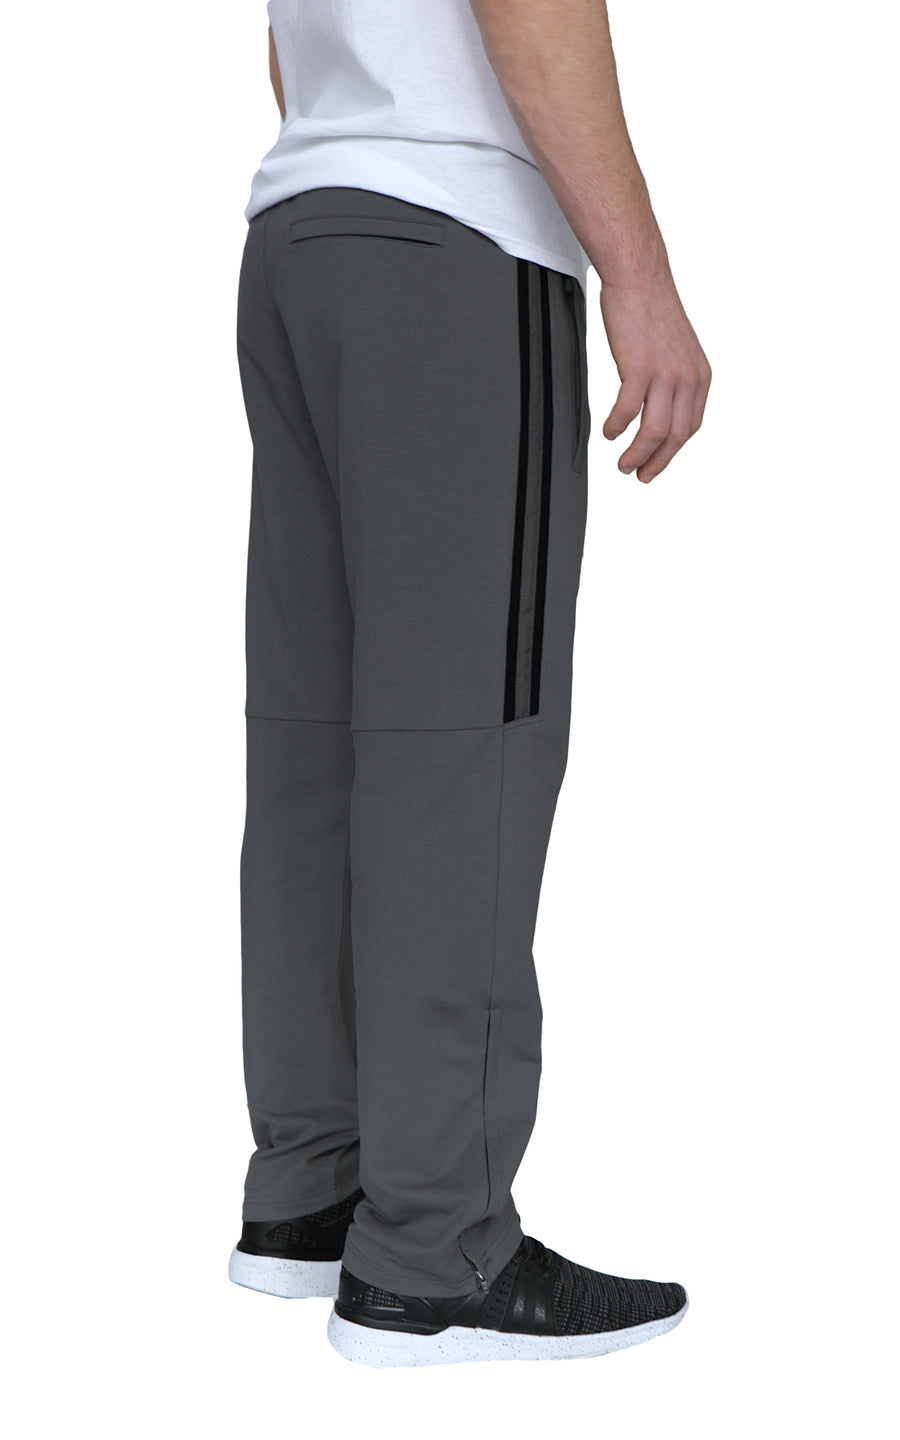 SCR SPORTSWEAR Men's All Day Comfort Tappered Slim Sweatpants  Athletic-Casual Lounge Pants Mens Running Joggers for Men (36W x 30L, Dark  Grey-K536)